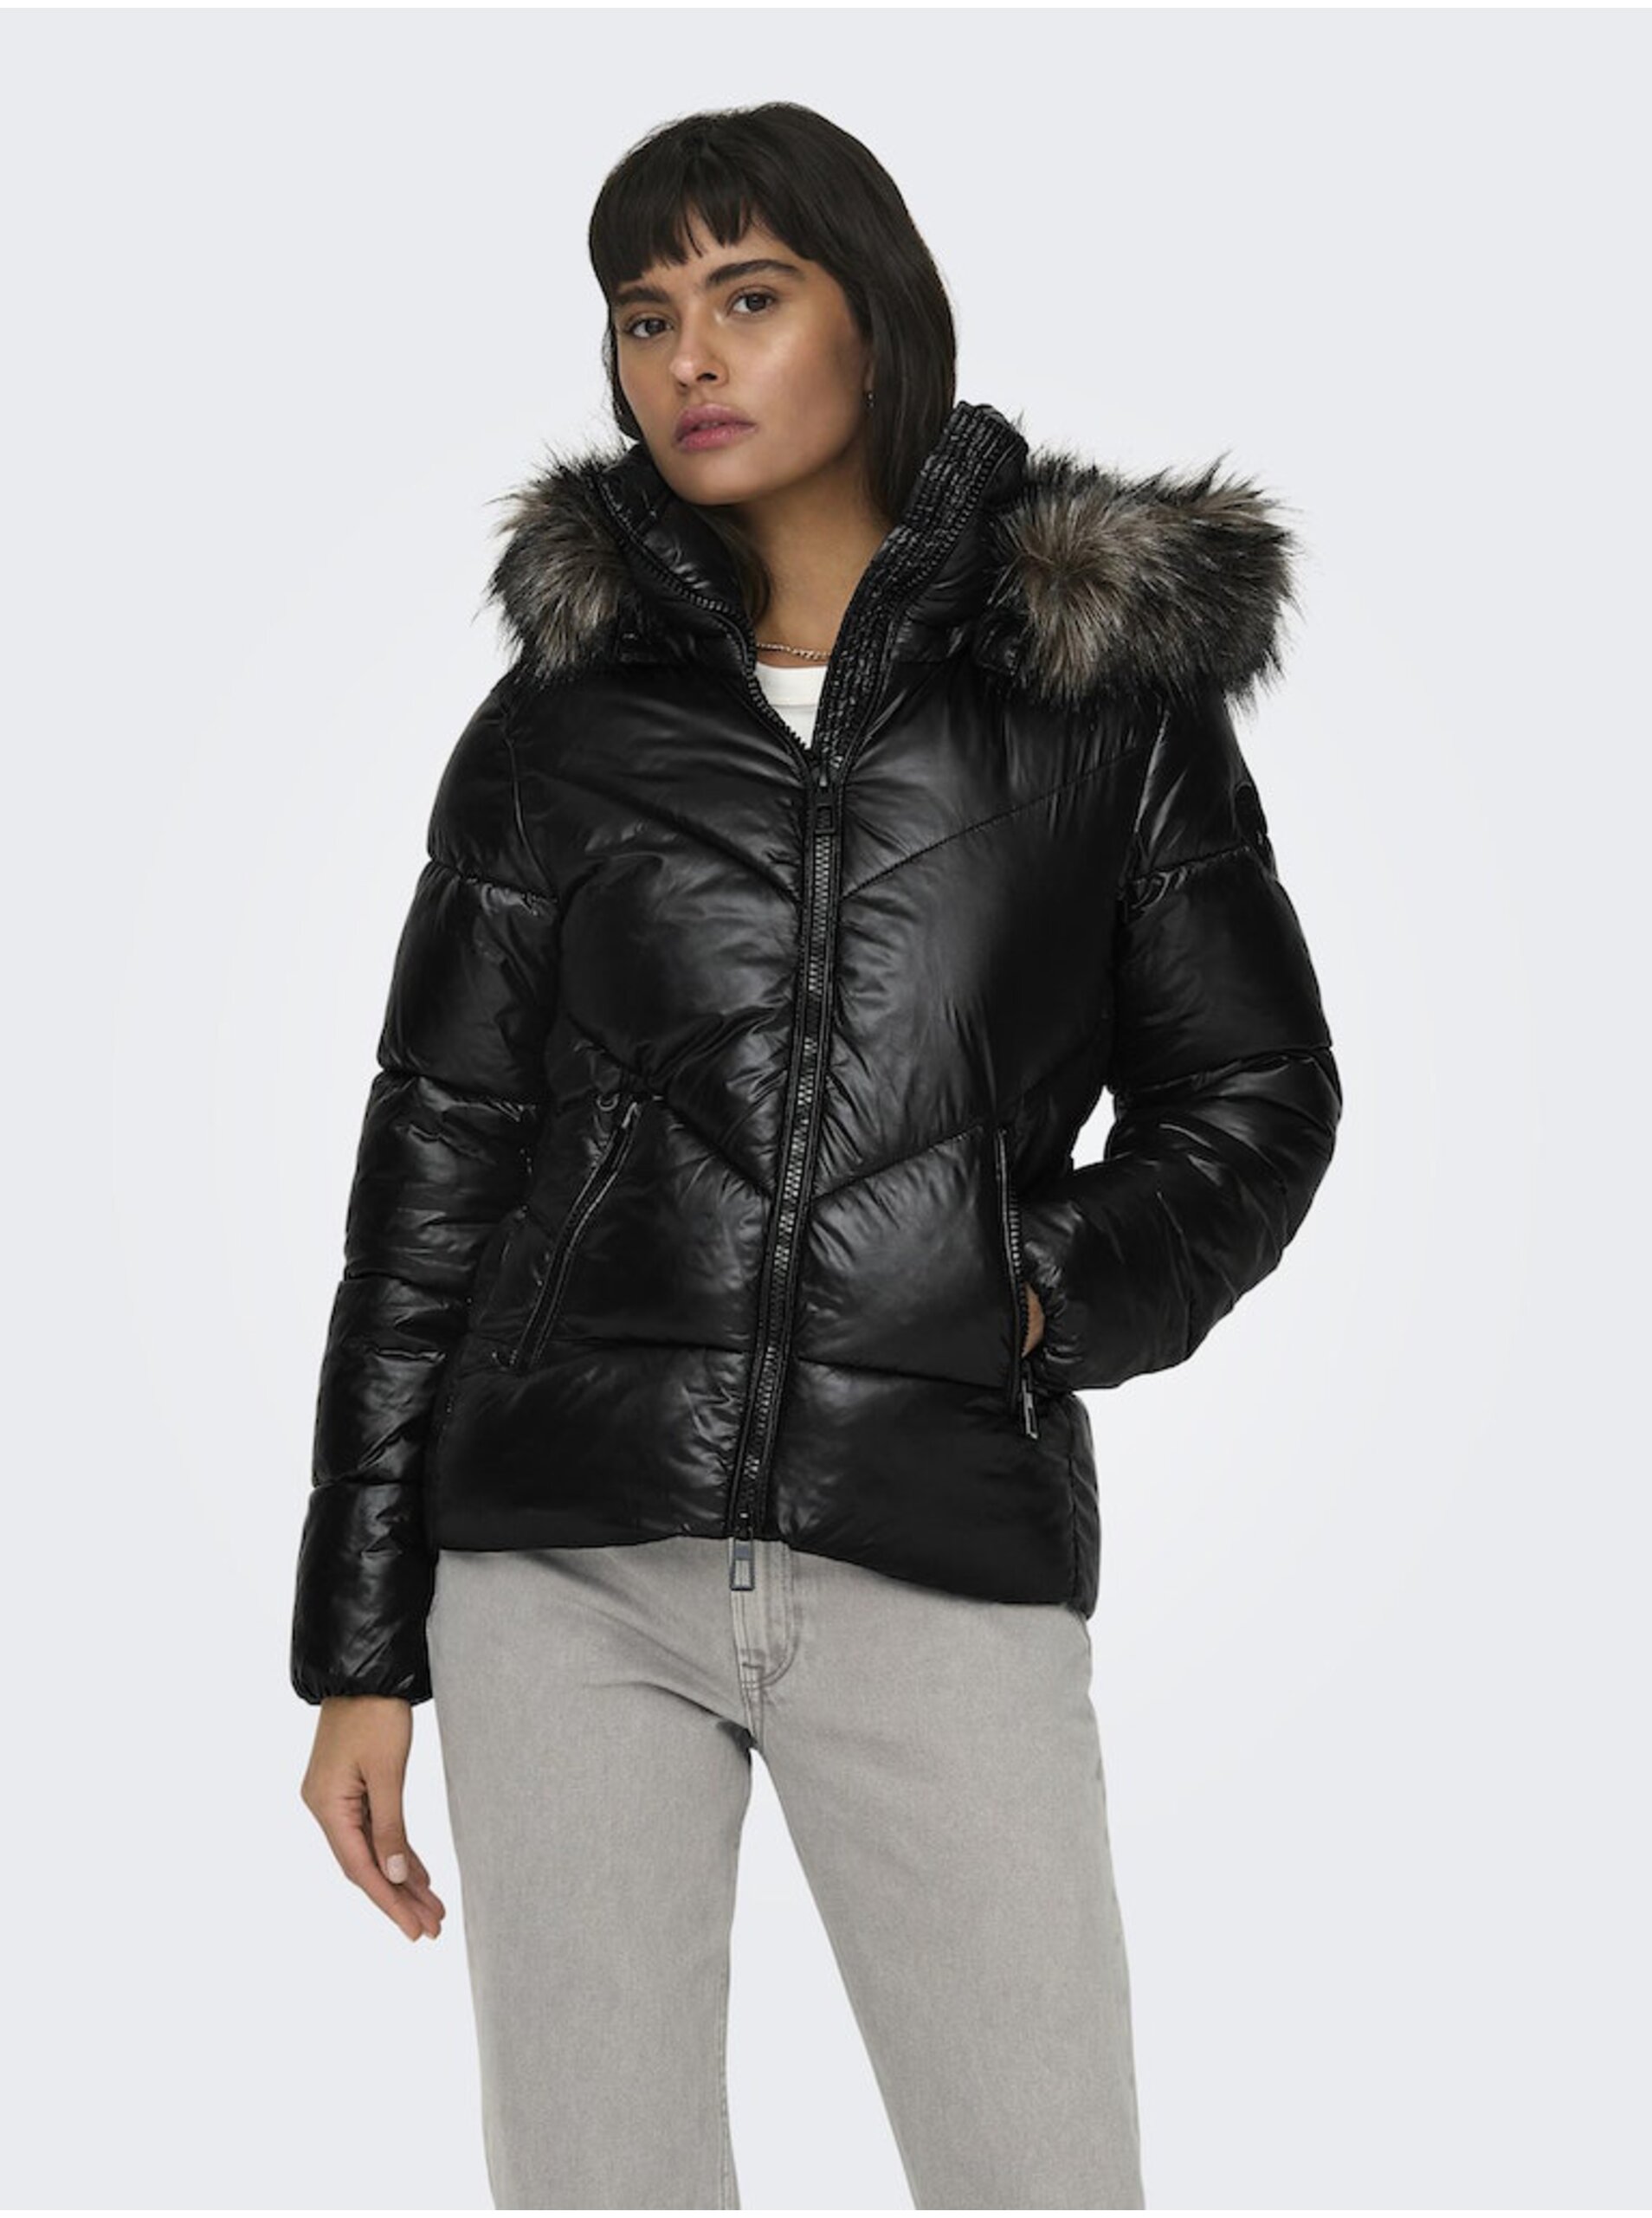 Black women's quilted jacket ONLY Fever - Women